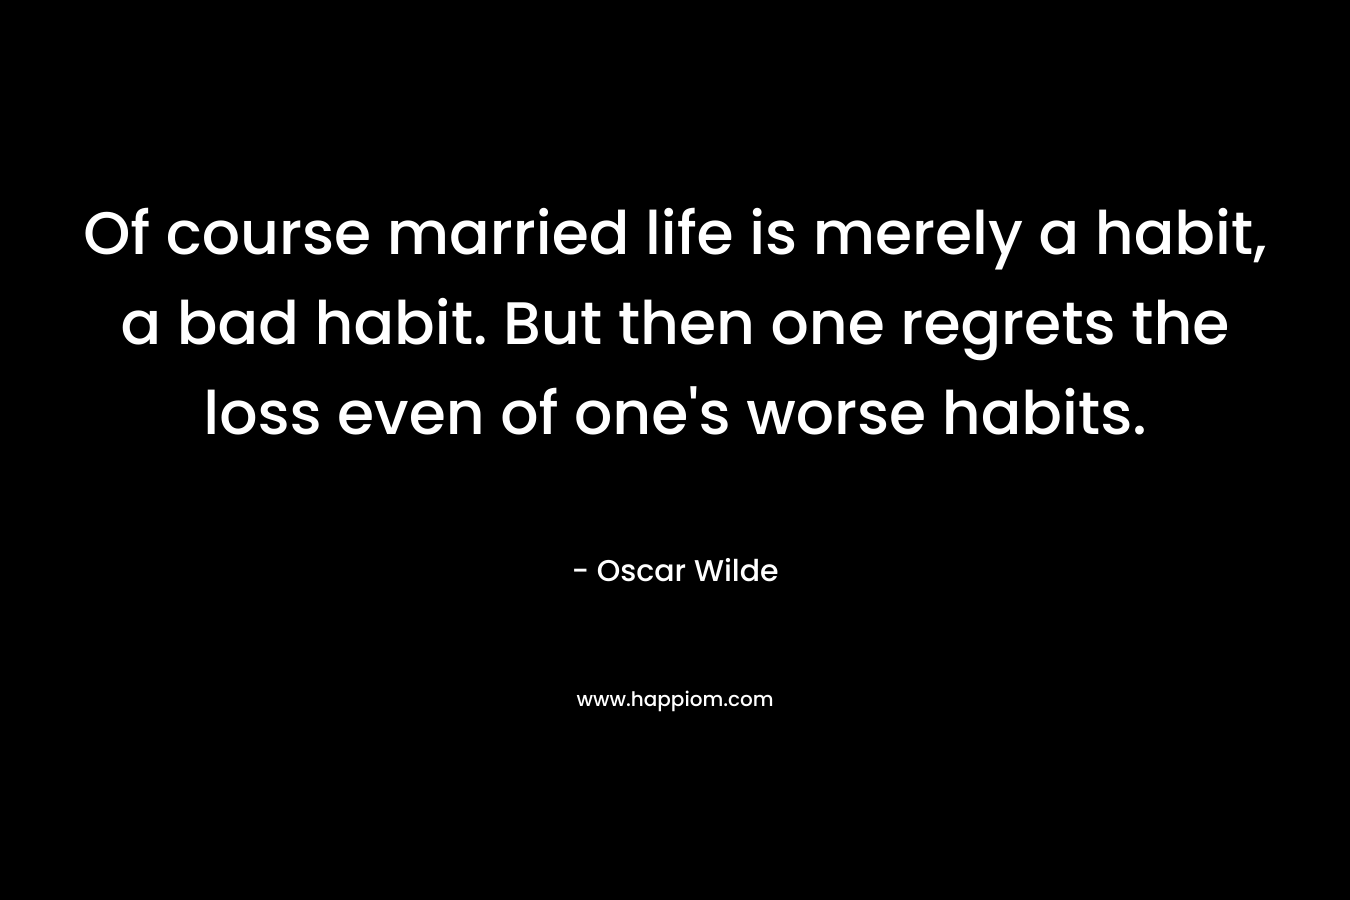 Of course married life is merely a habit, a bad habit. But then one regrets the loss even of one's worse habits.